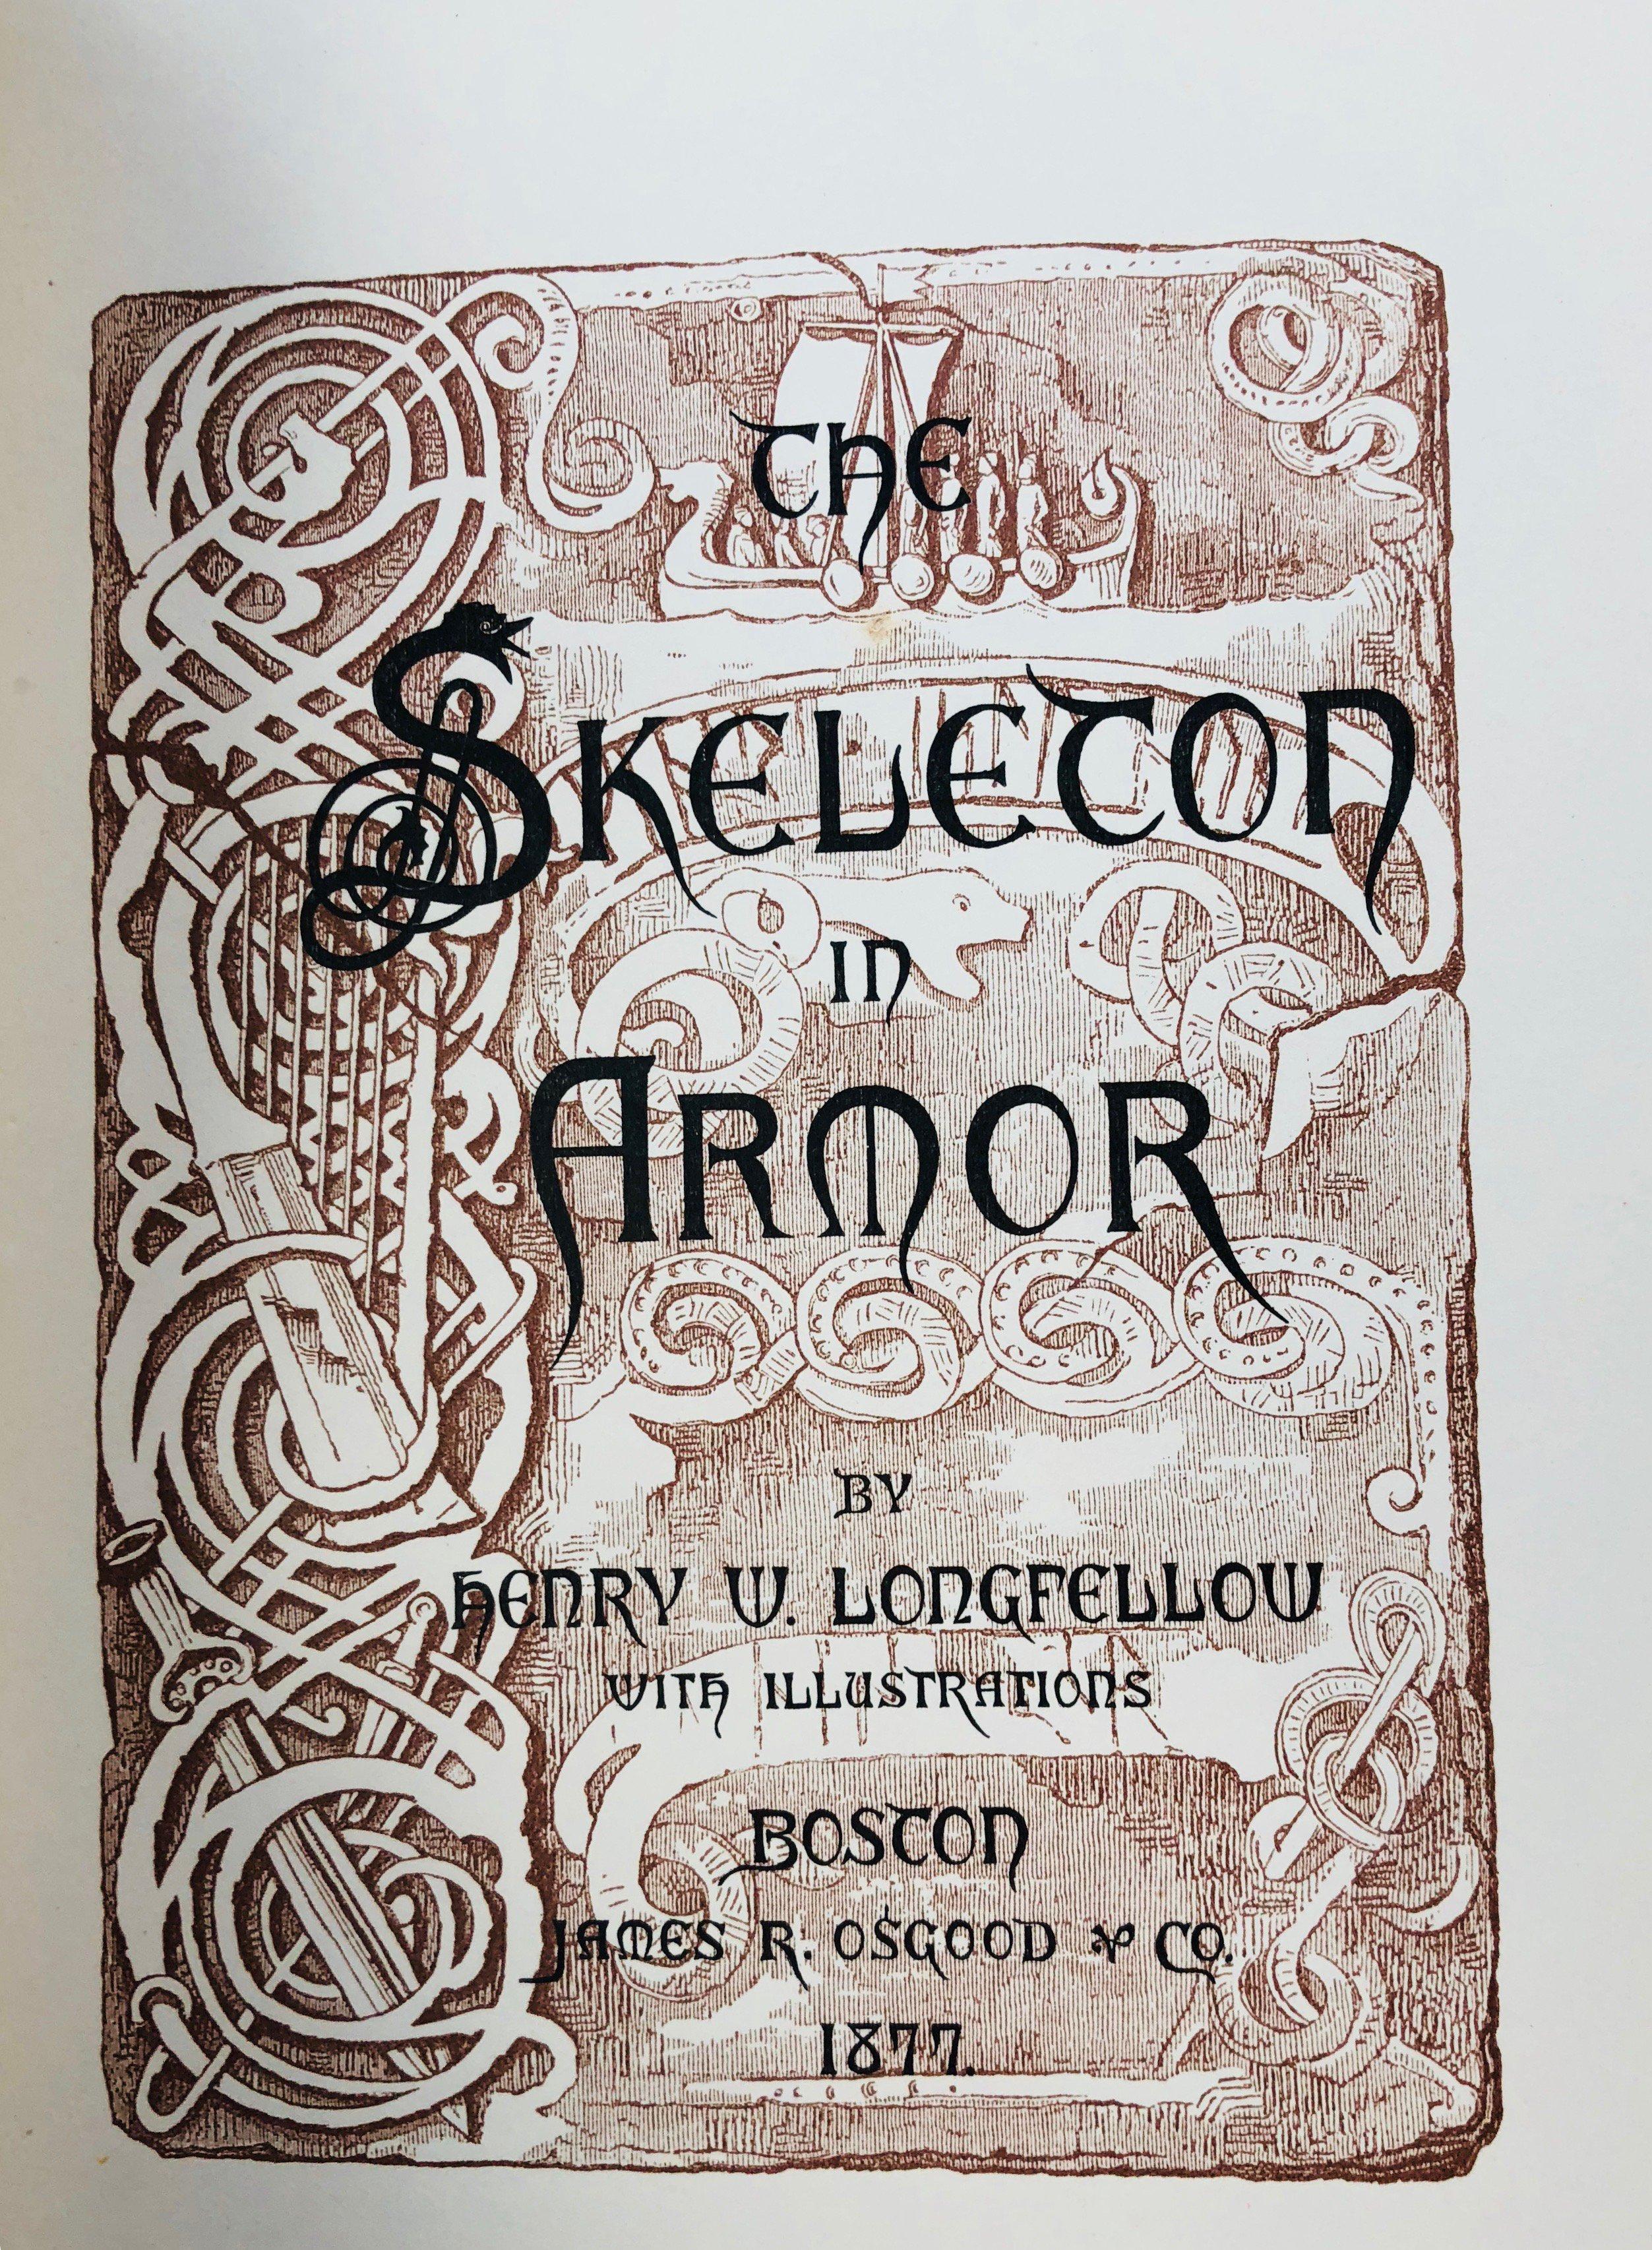 The Skeleton in Armor by H.W. Longfellow (1877) Wonderful Cover